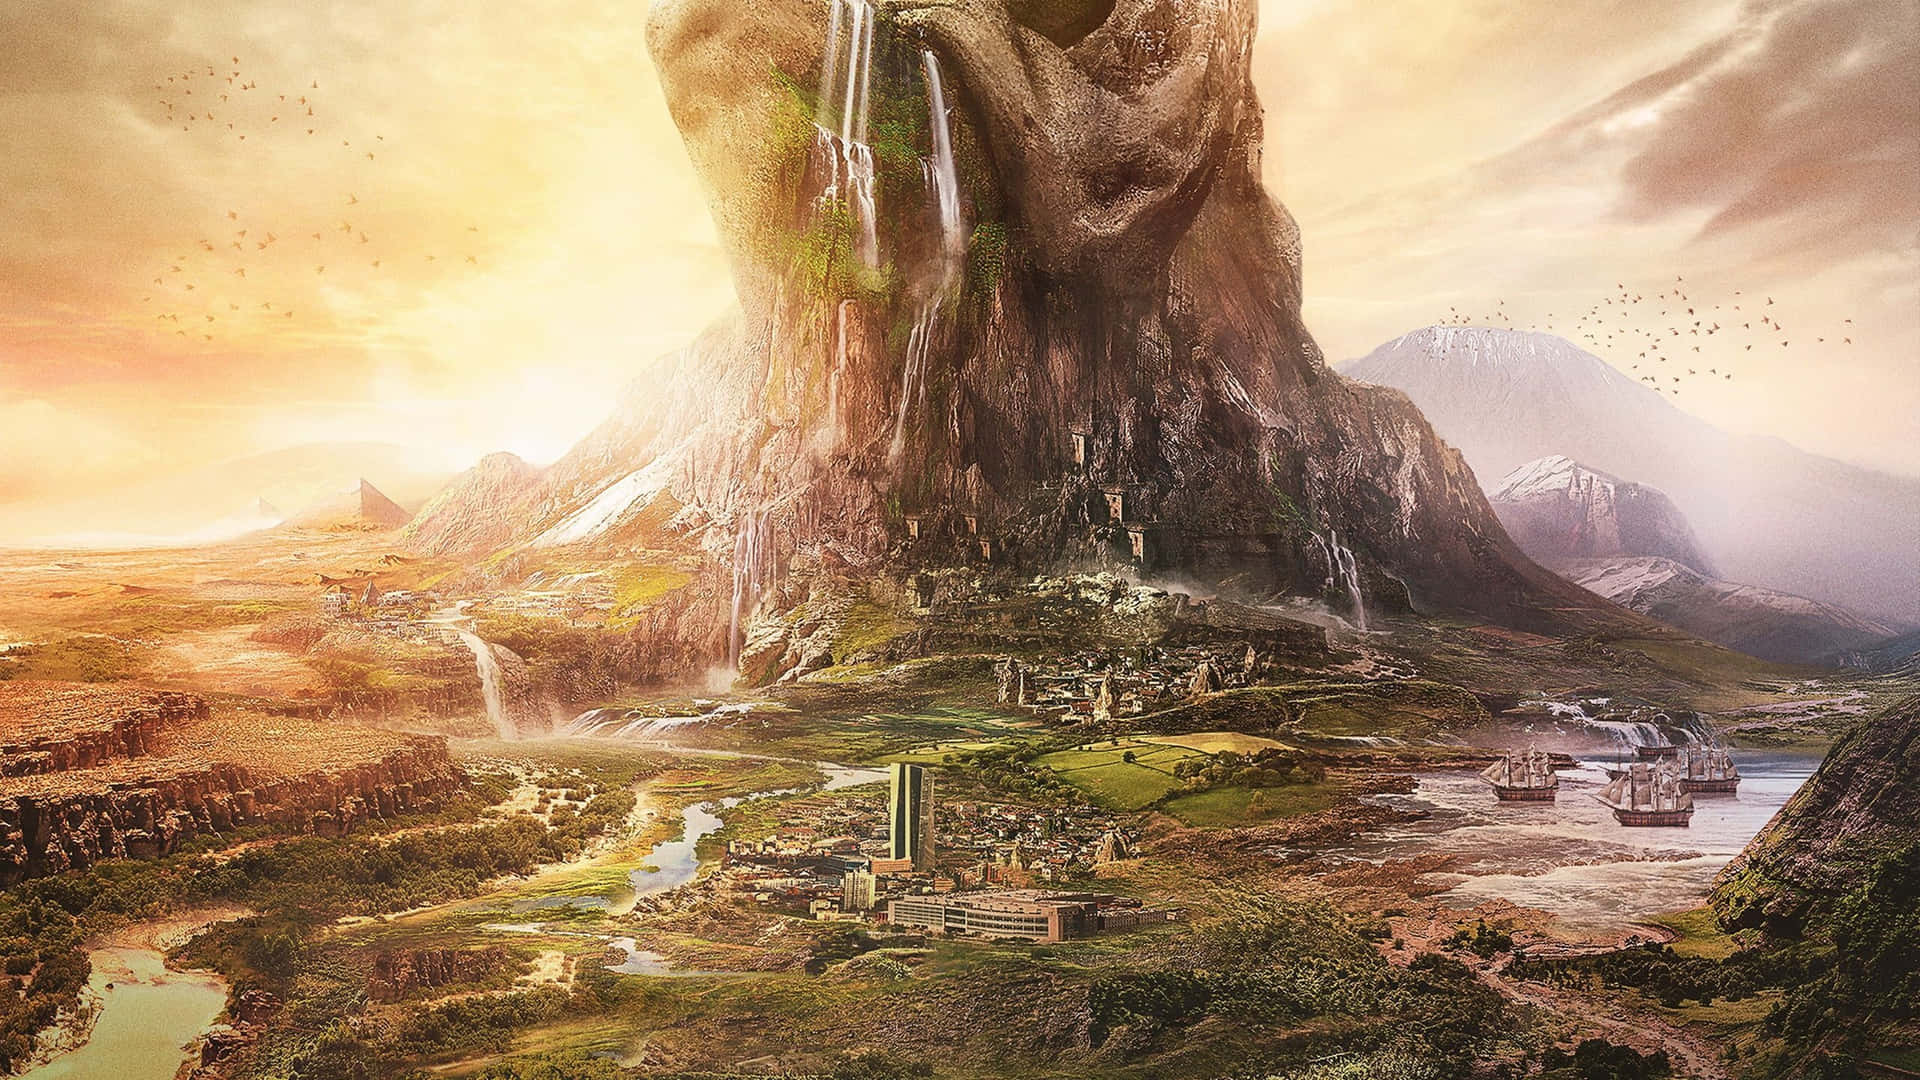 A Fantasy Landscape With A Waterfall And A Mountain